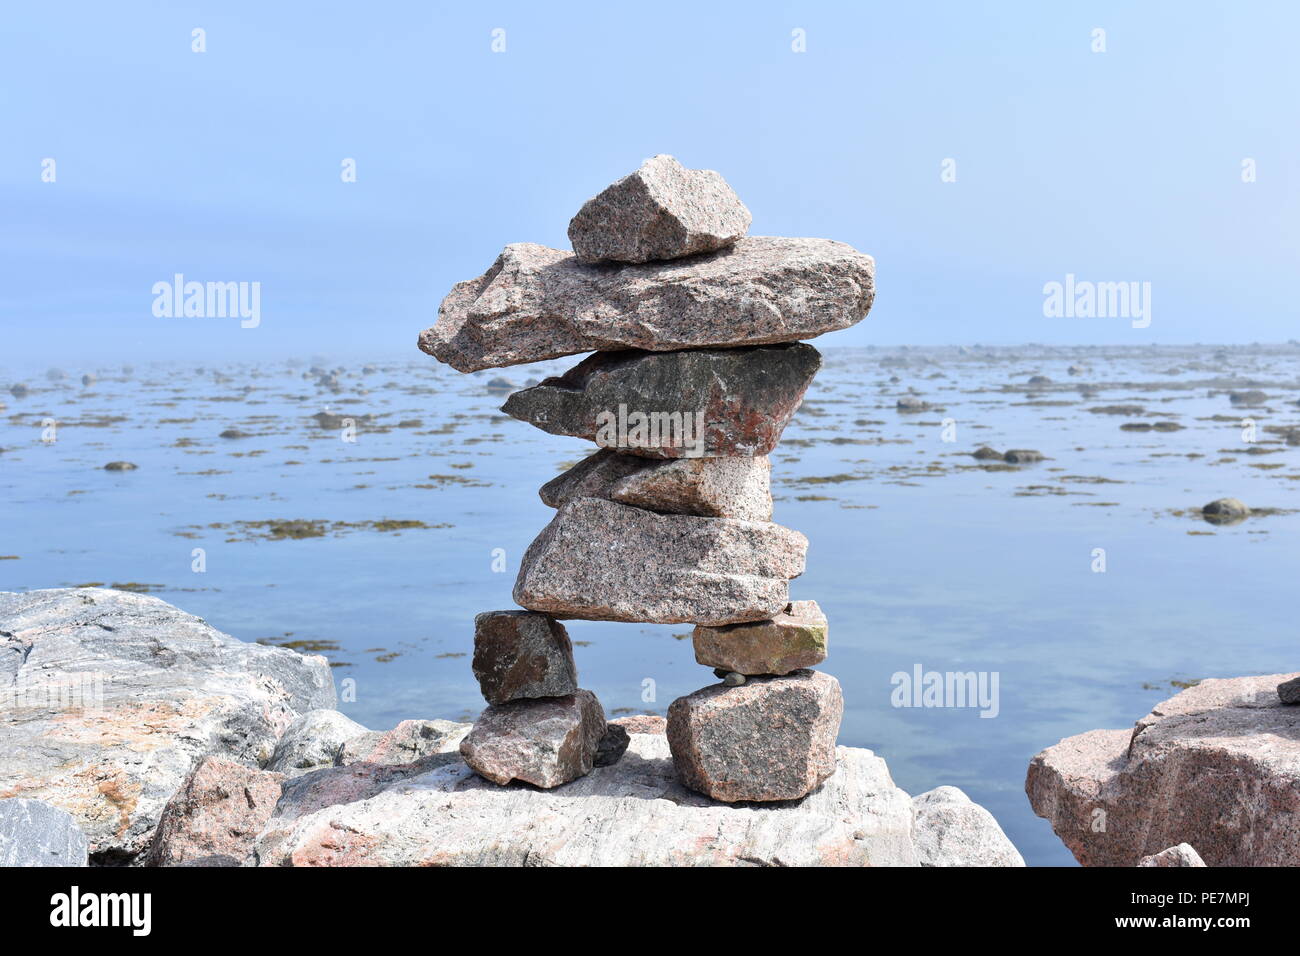 An Inukshuk from the Inuit culture in Quebec, Canada Stock Photo